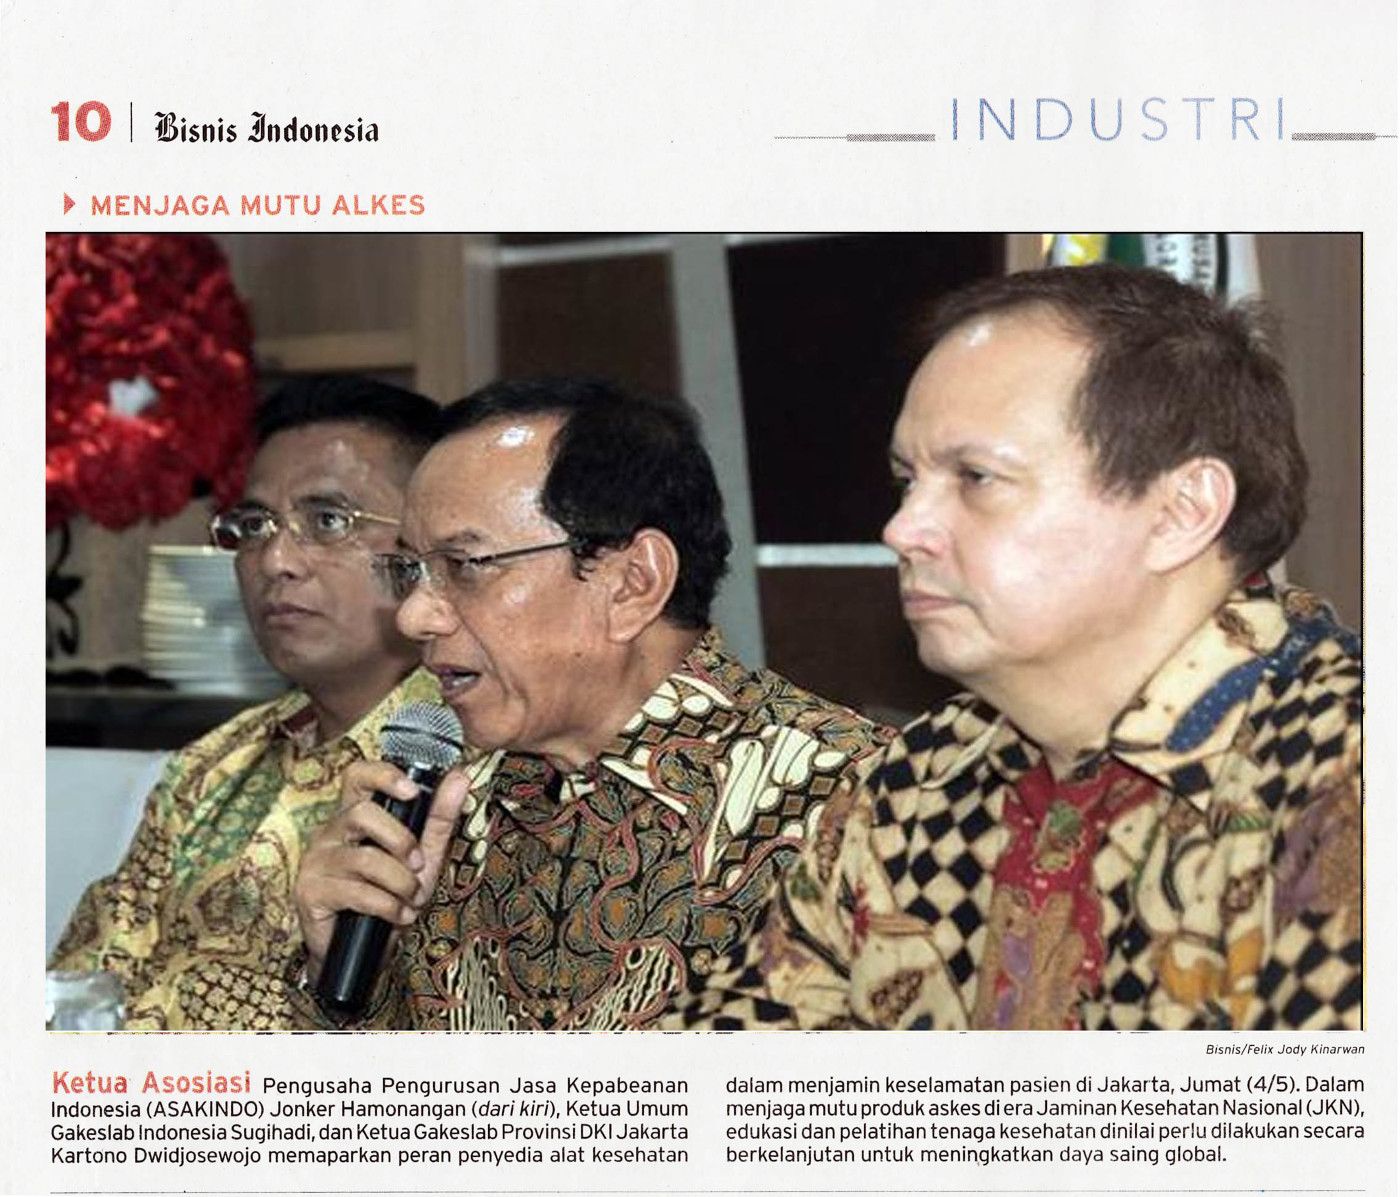 Bisnis Indonesia Edition May 2018 - Keep the Quality of Medical Device Product